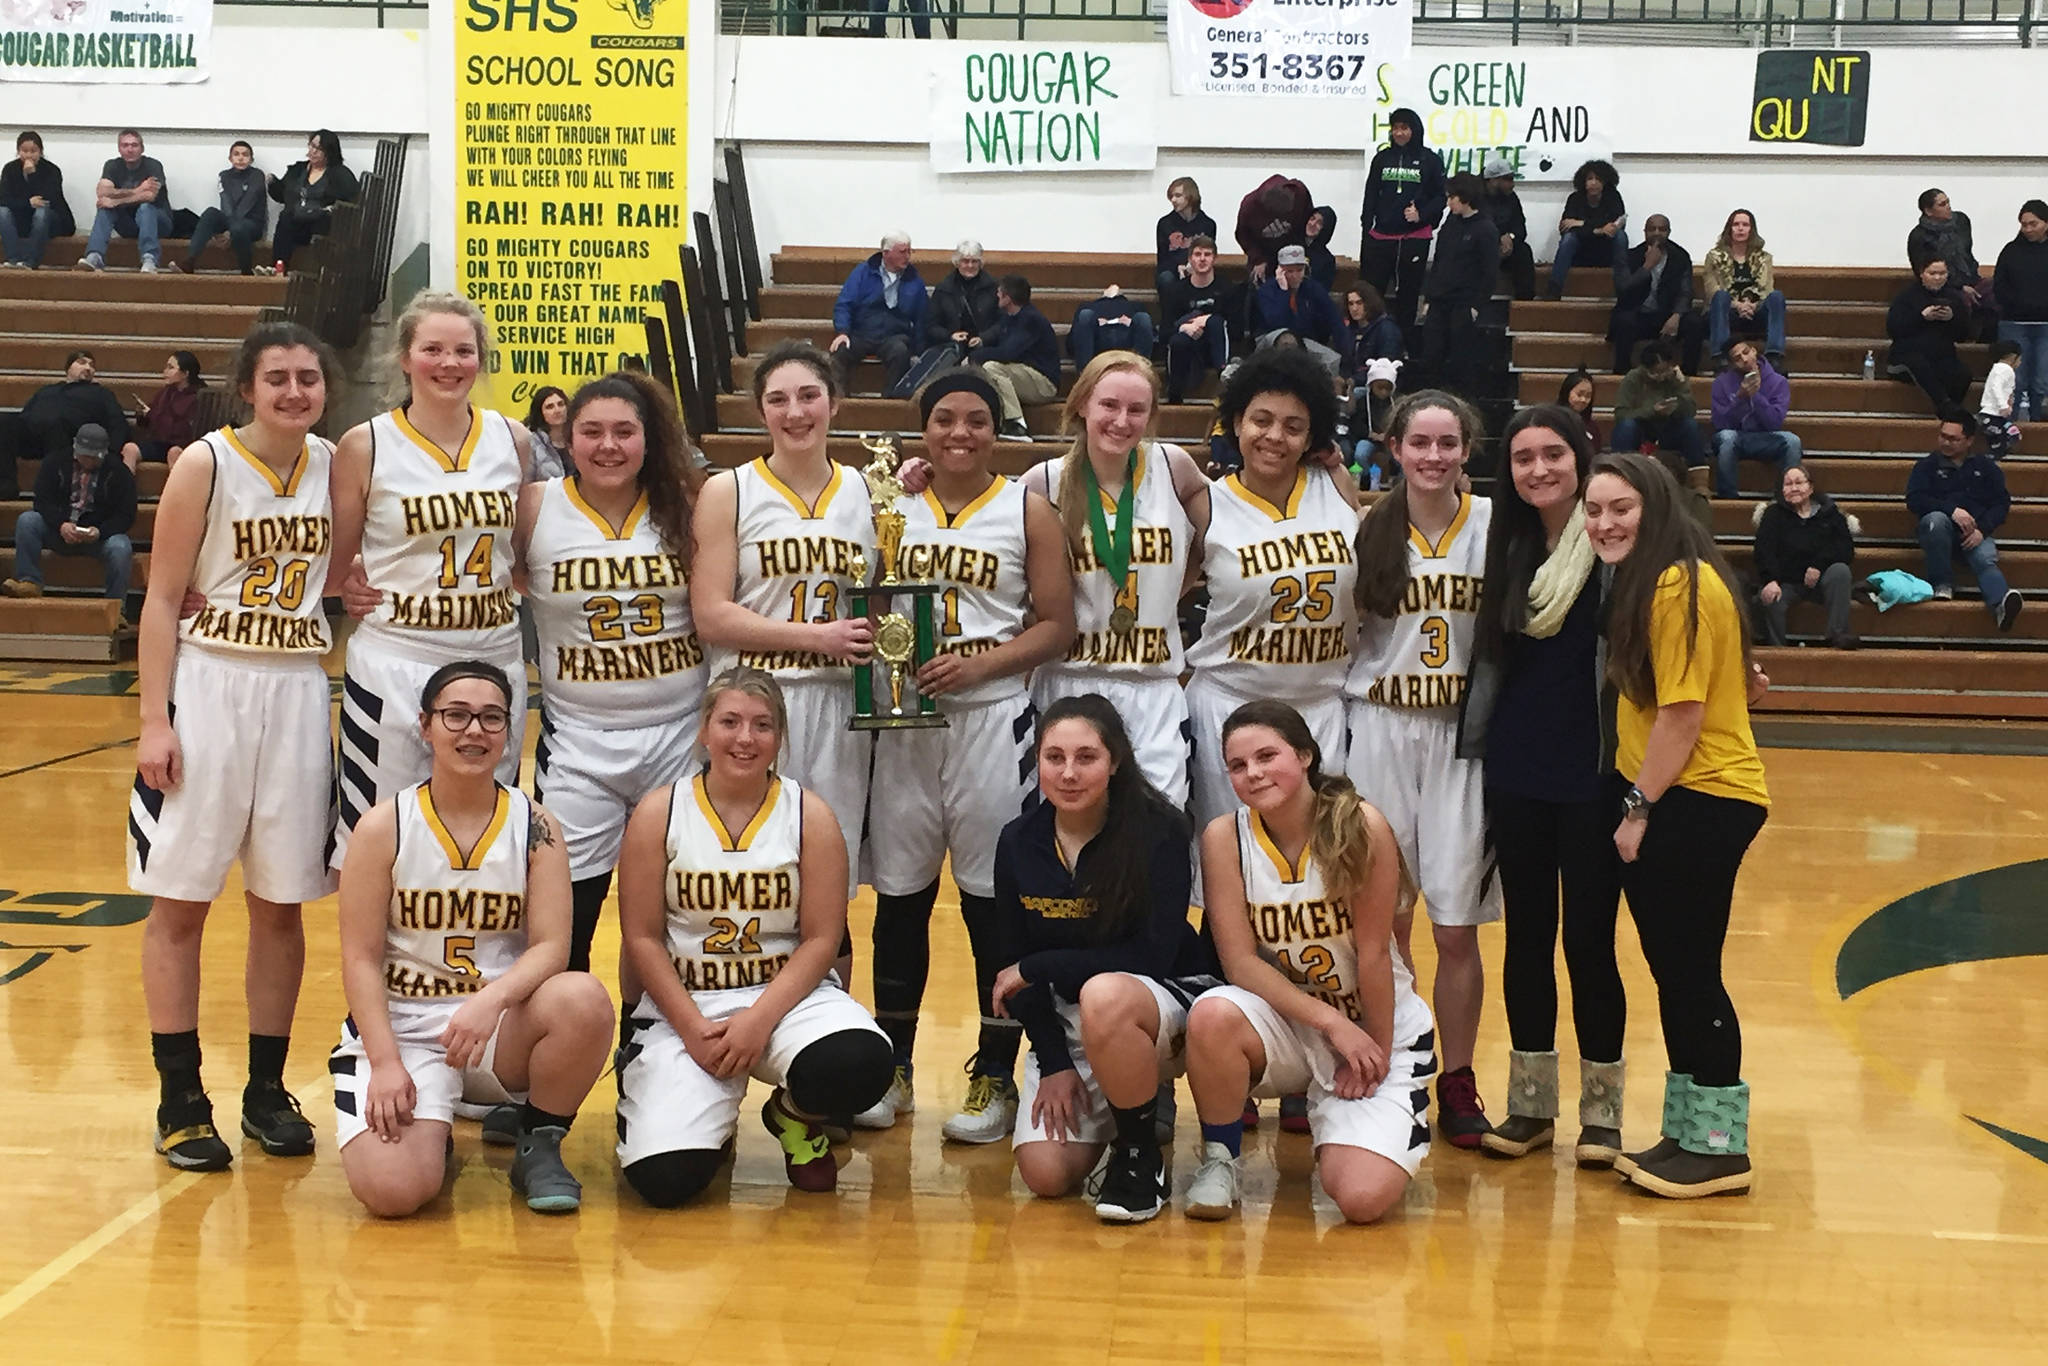 The Homer girls basketball team holds their first place trophy at the Service Cougar Tip Off tournament, held Friday and Saturday, Dec. 14-15, 2018 in Anchorage, Alaska. Top row from left to right: Marina Carroll, Cora Parish, Bri Hetrick, Rylyn Todd, Alia bales, Kelli Bishop, Lexi Dawson, Laura Inama, Manager Brooke Knotte, and Manager Katie Clark. Bottom row: Shelly Johnson, Alexis Kreger, Hannah Hatfield, and Rylee Doughty. (Photo by Wendy Todd)